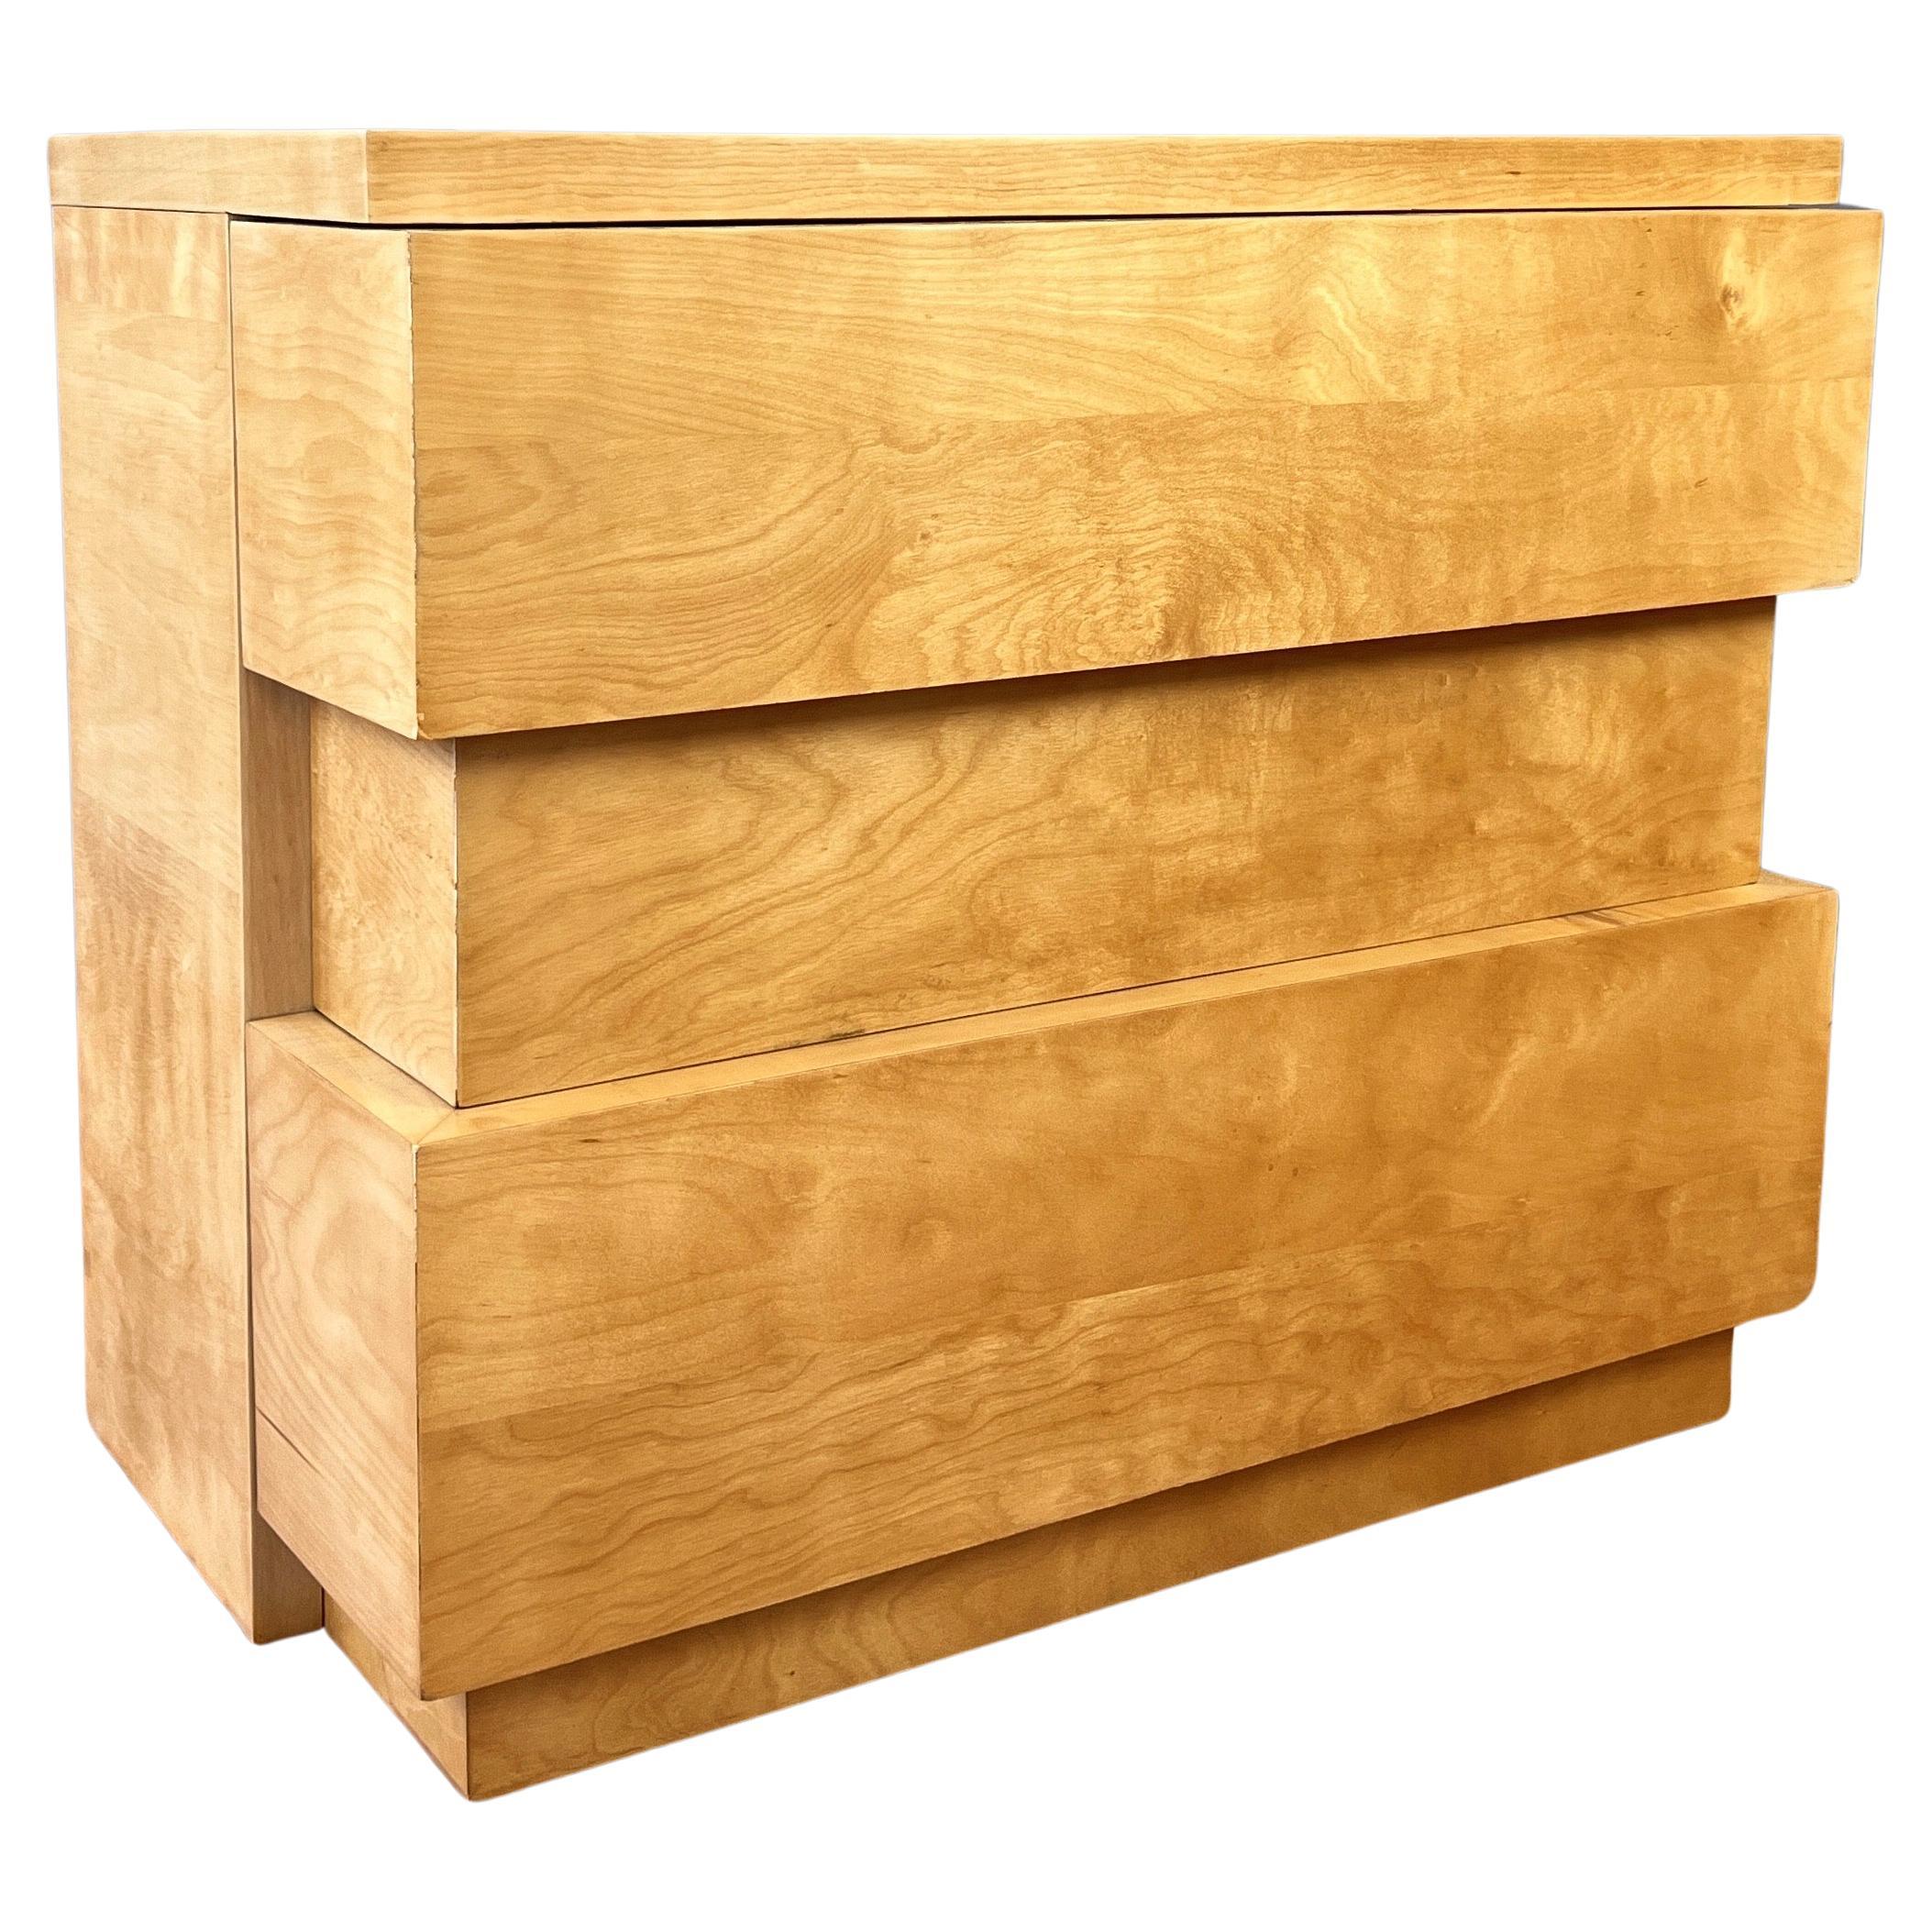 Dan Johnson for Hayden Hall Maple Chest of Drawers, 1946–47 For Sale